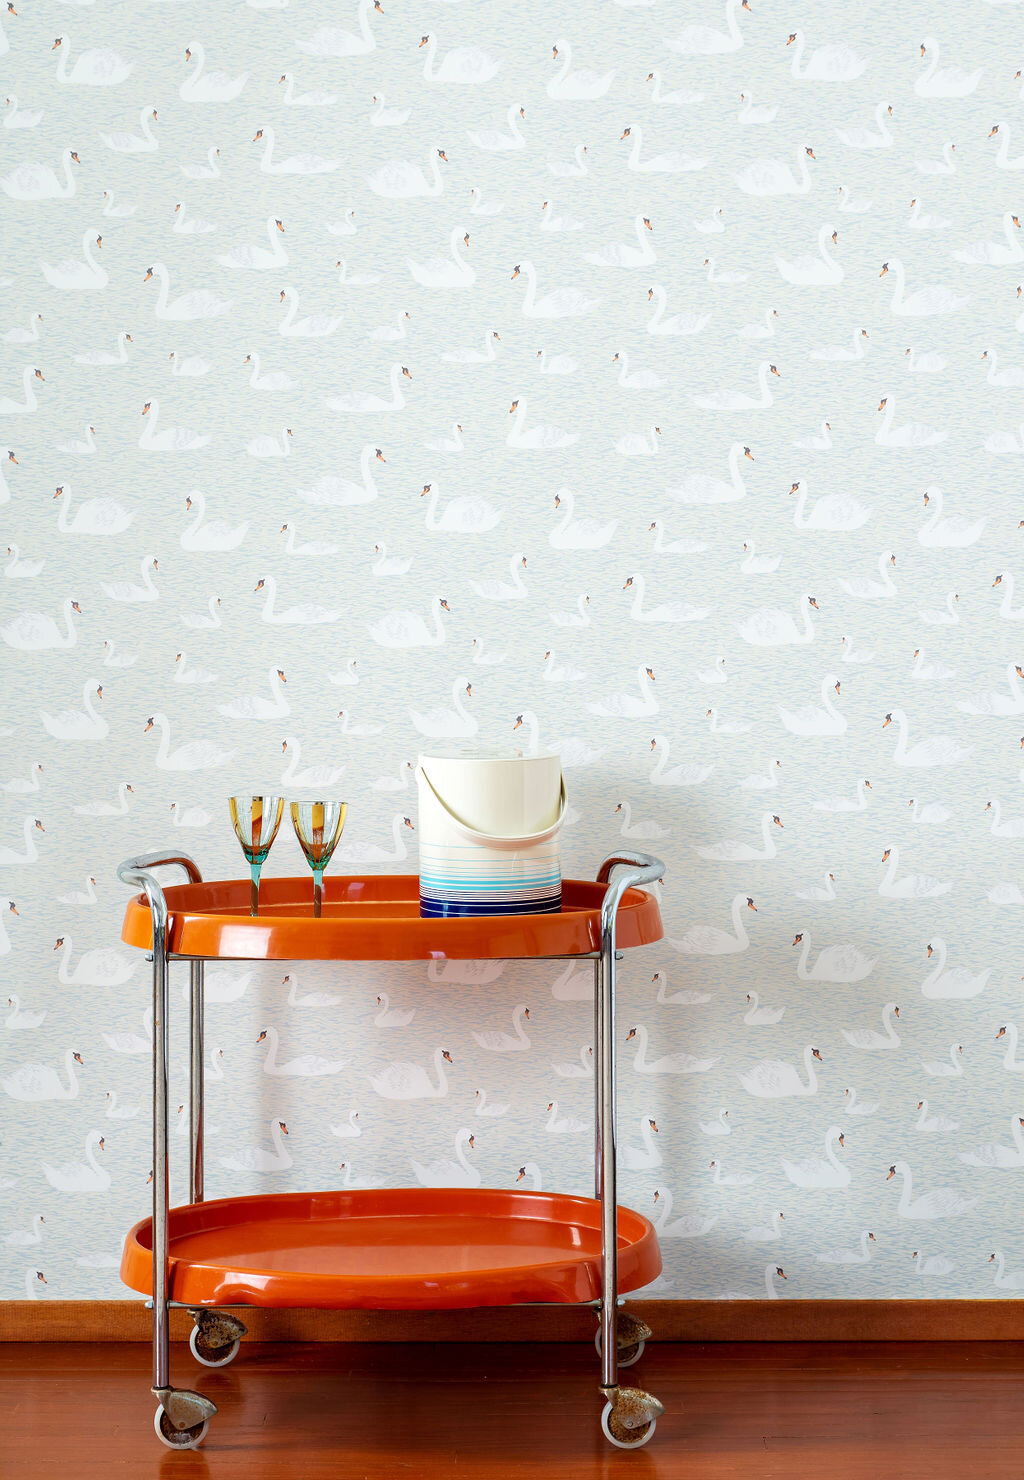 Kate Golding Swans wallpaper // Modern wallcoverings and interior decor.